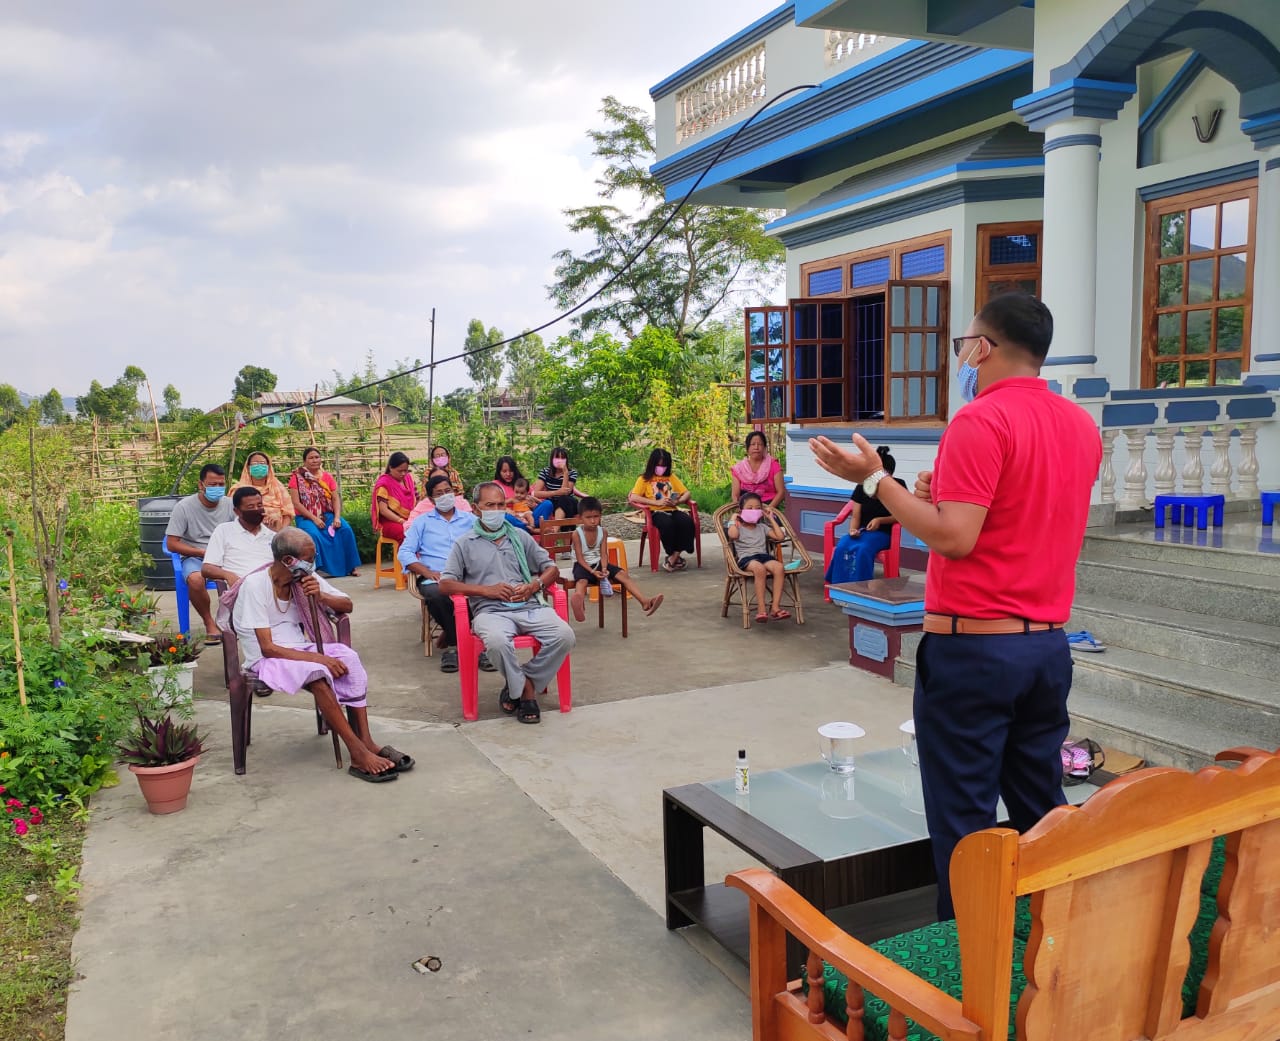 S.Mexico Singh, Research Scholar (Parasitology) held a peaceful interaction with a group at Yairipok  kekru mathak leikai.